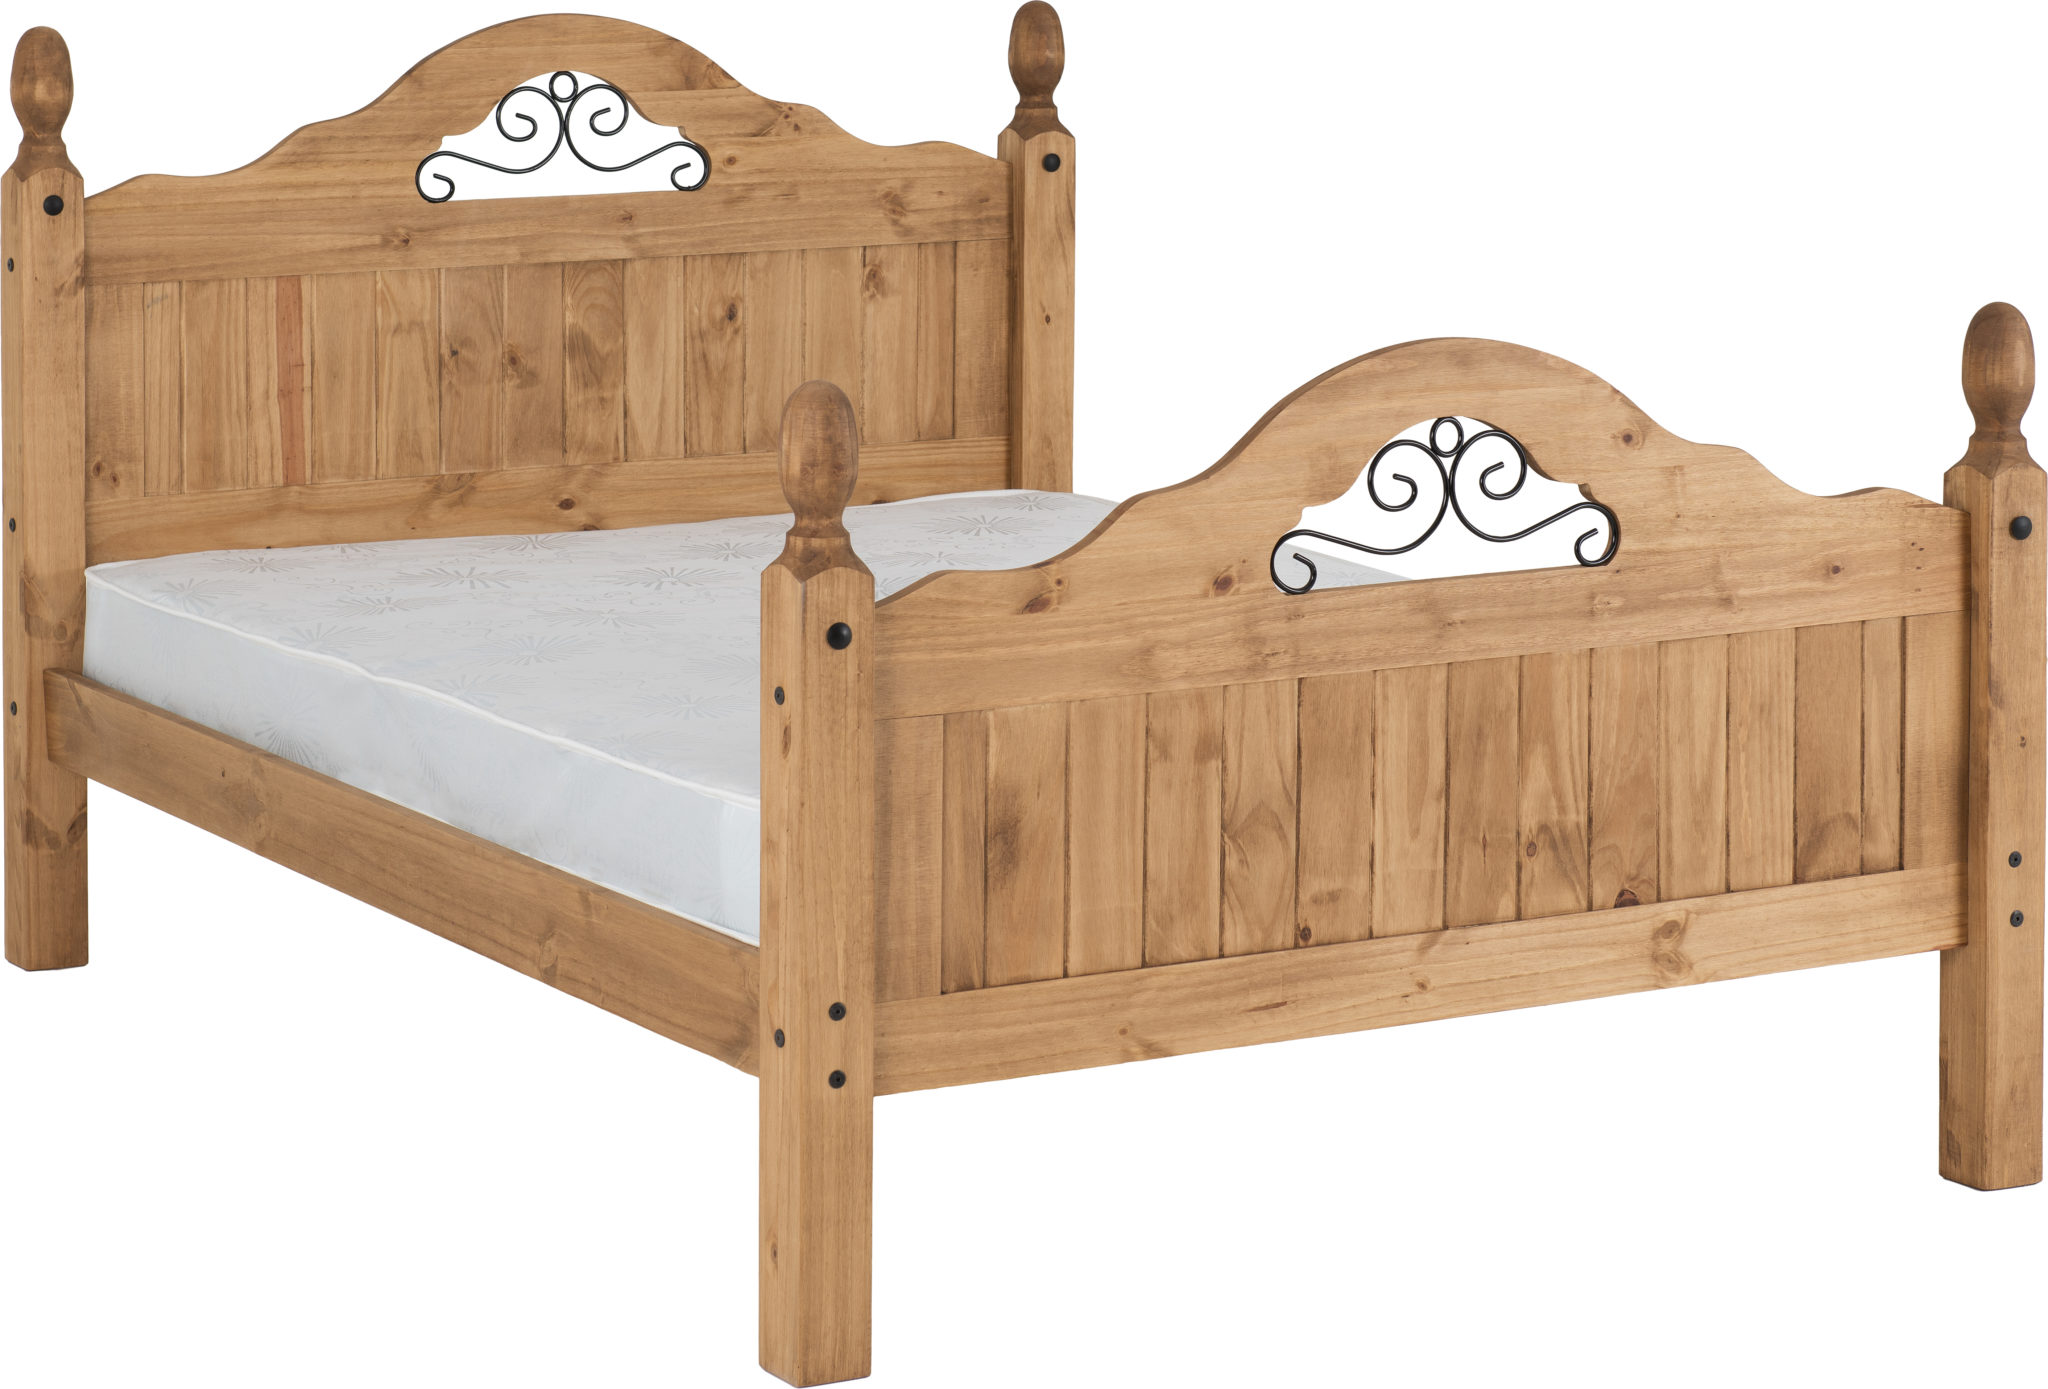 Corona Scroll 4'6" Bed High Foot End In Distressed Waxed Pine - Click Image to Close